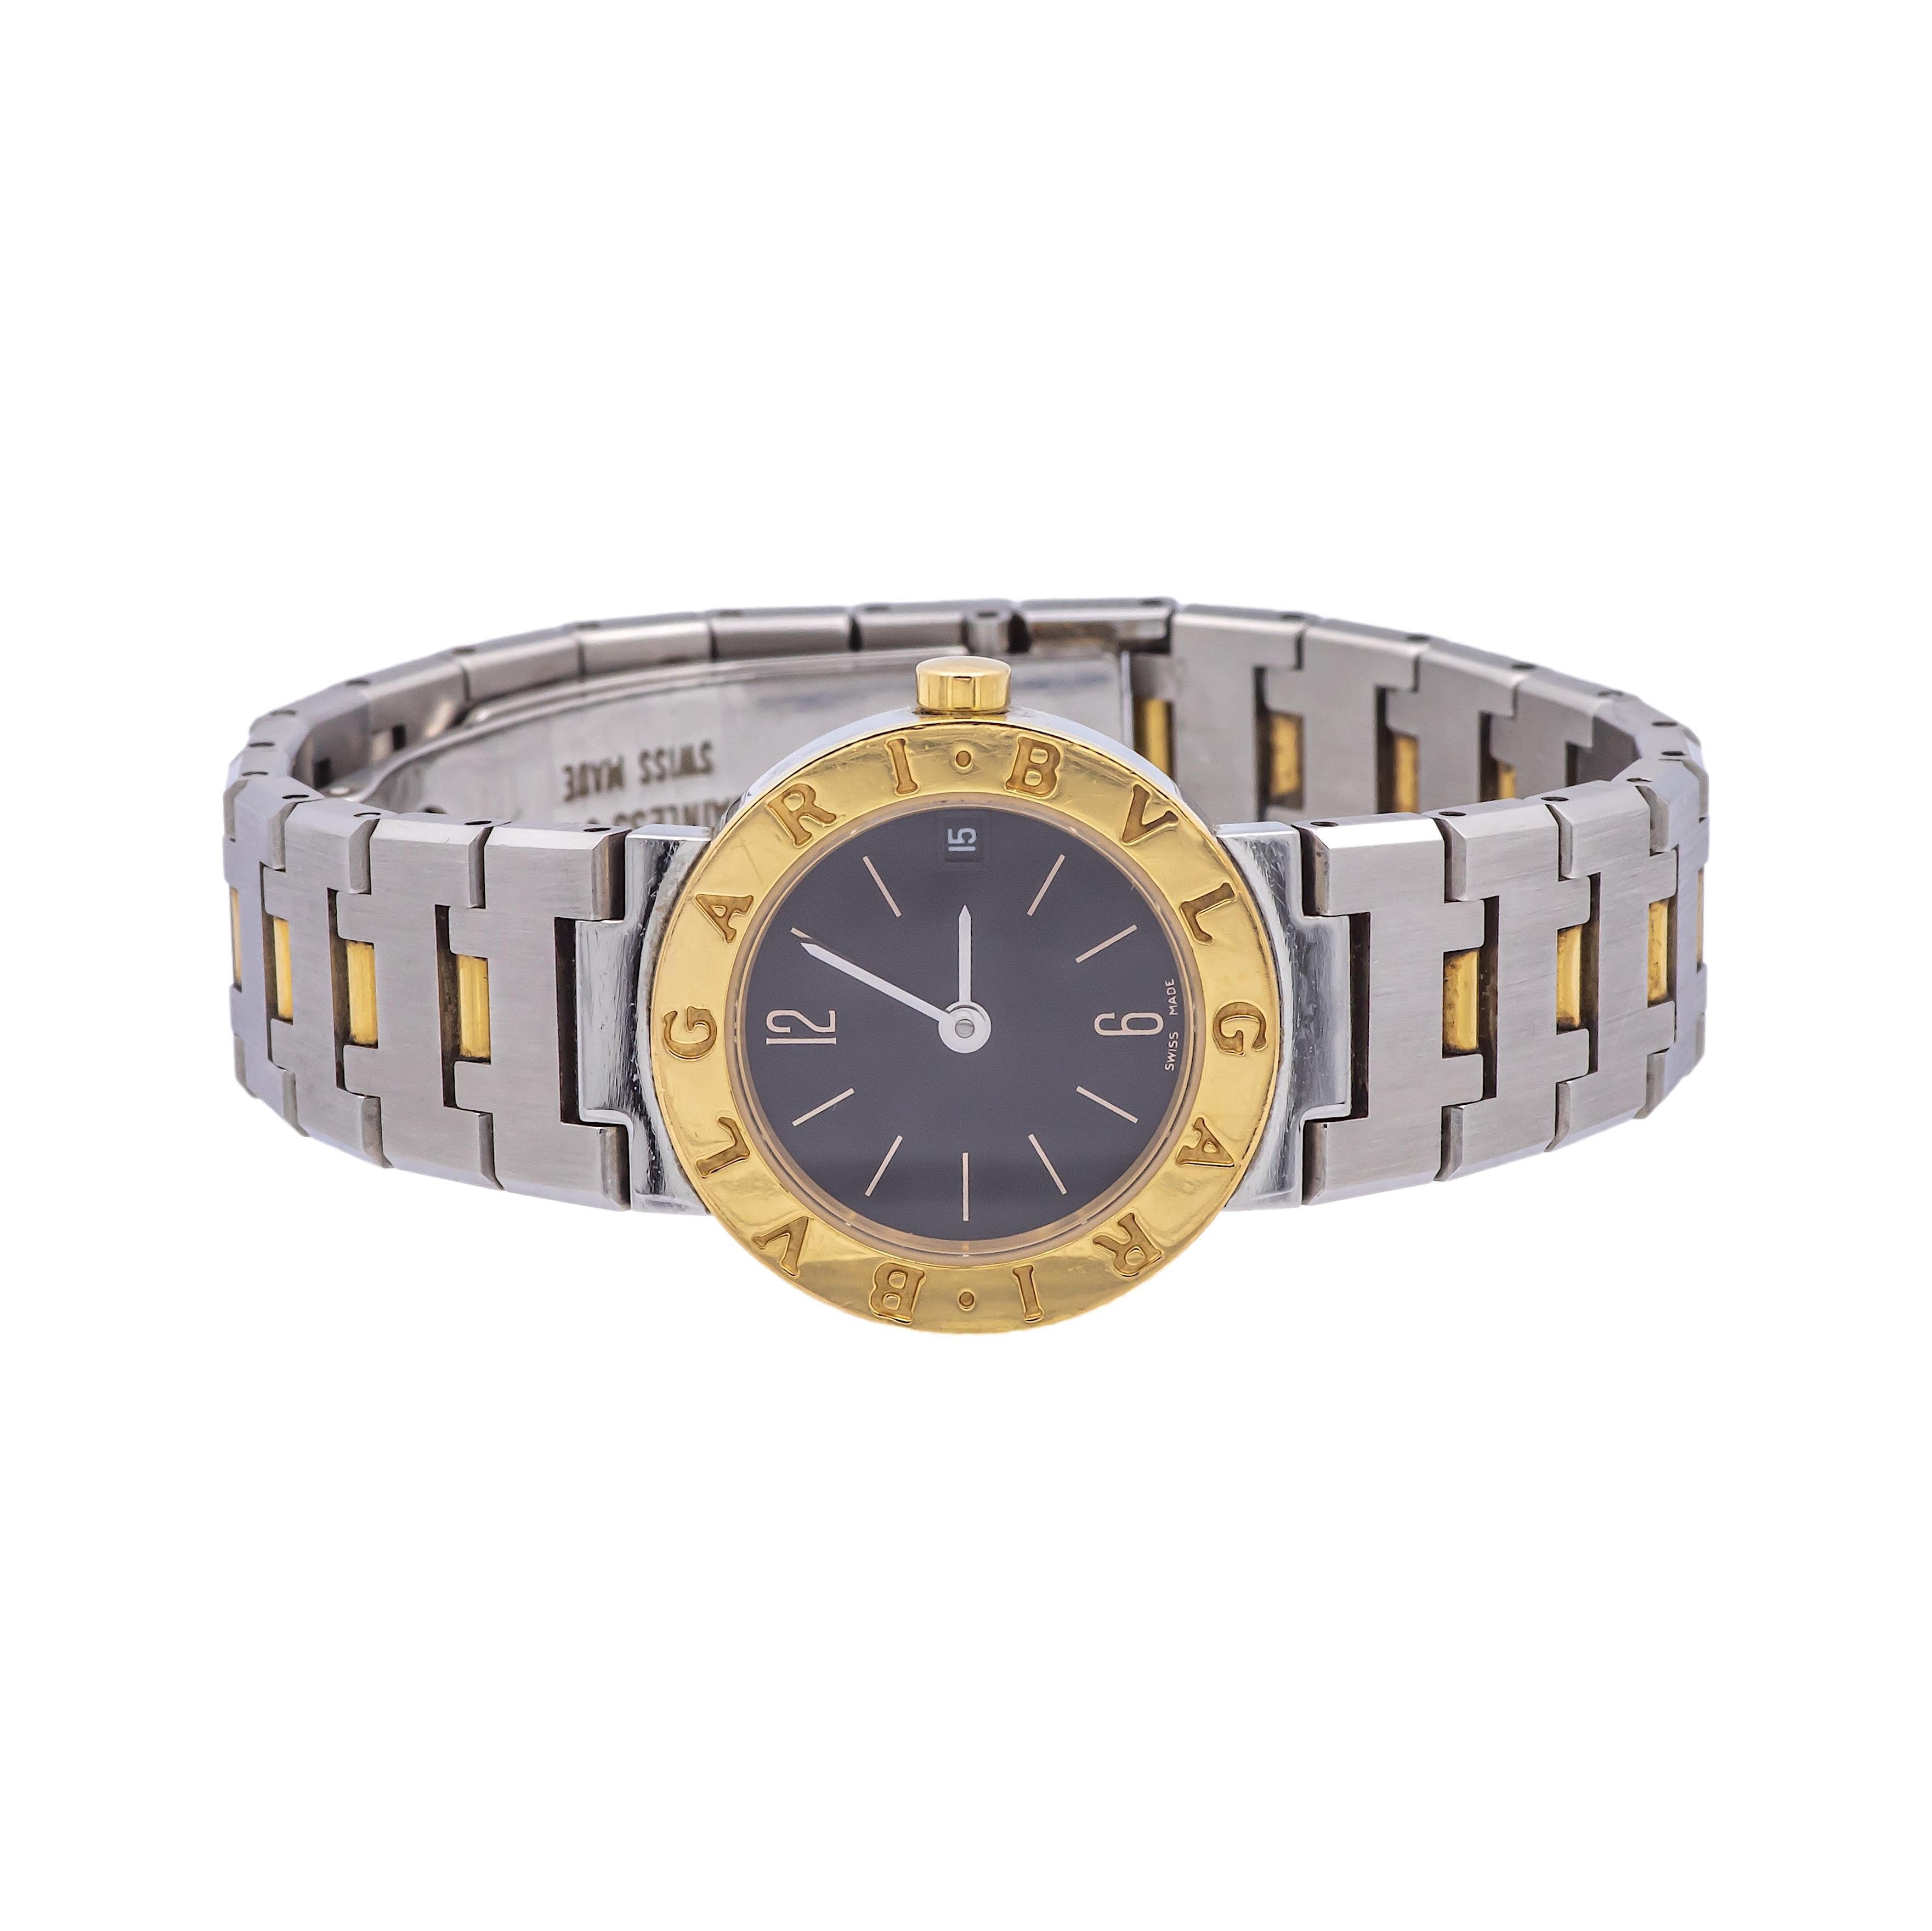 Classic pre-owned Bvlgari Bvlgari quartz ladies watch with model BB23SGD finely crafted in 18K Yellow Gold & Stainless Steel bracelet with a Stainless Steel Deployant buckle. This Bvlgari watch has a 23 mm case with a Round caseback and Black face